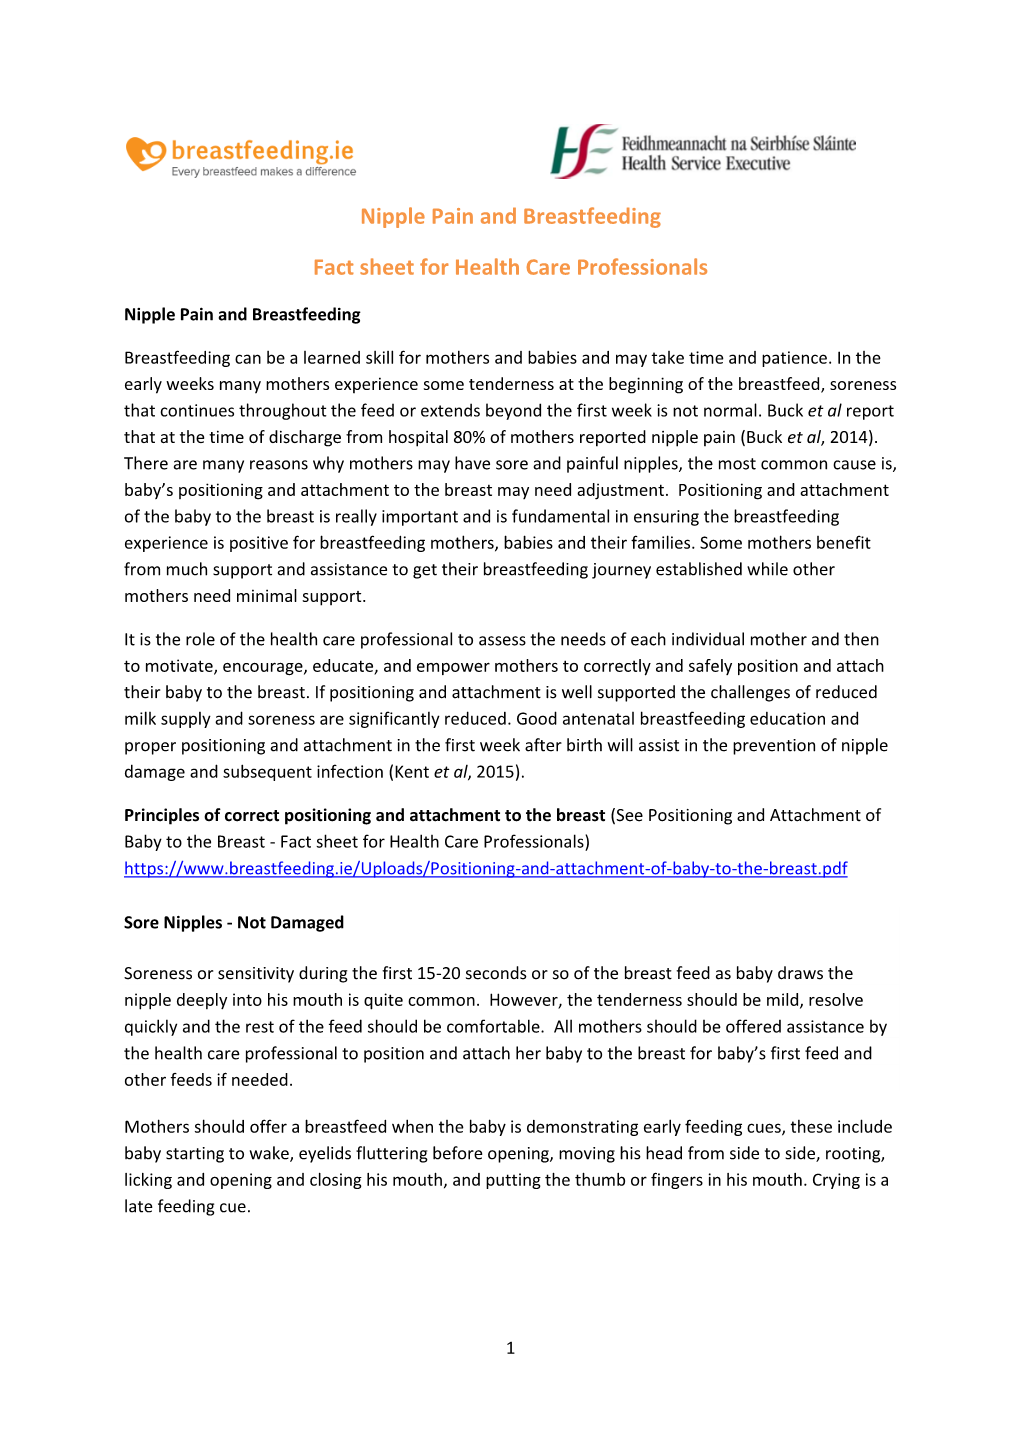 Nipple Pain and Breastfeeding Fact Sheet for Health Care Professionals